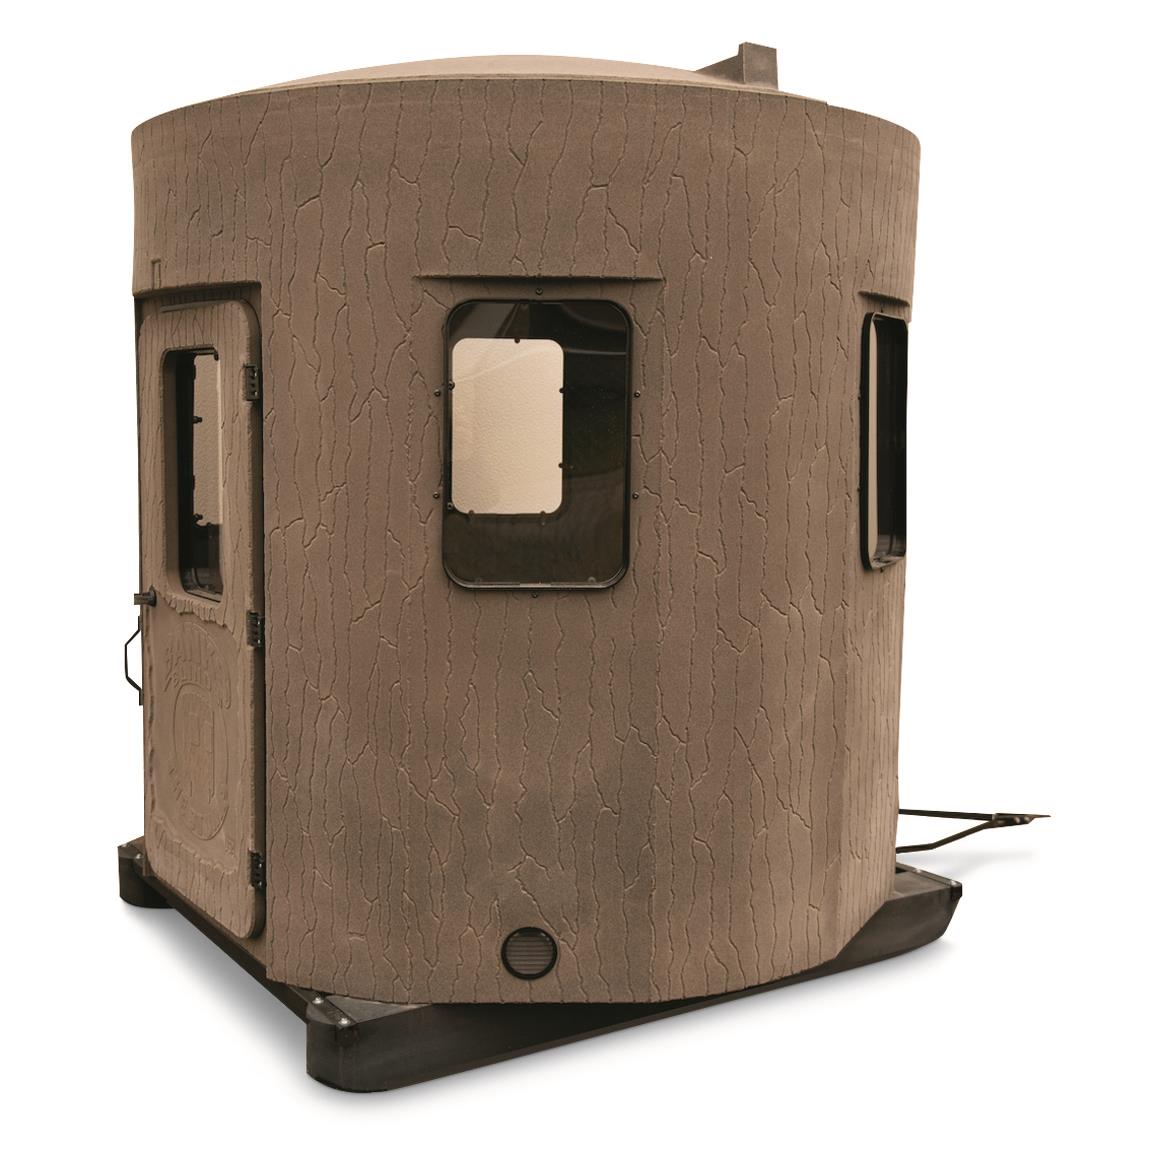 Banks Outdoors® The Stump 4 Ice Fishing Shelter